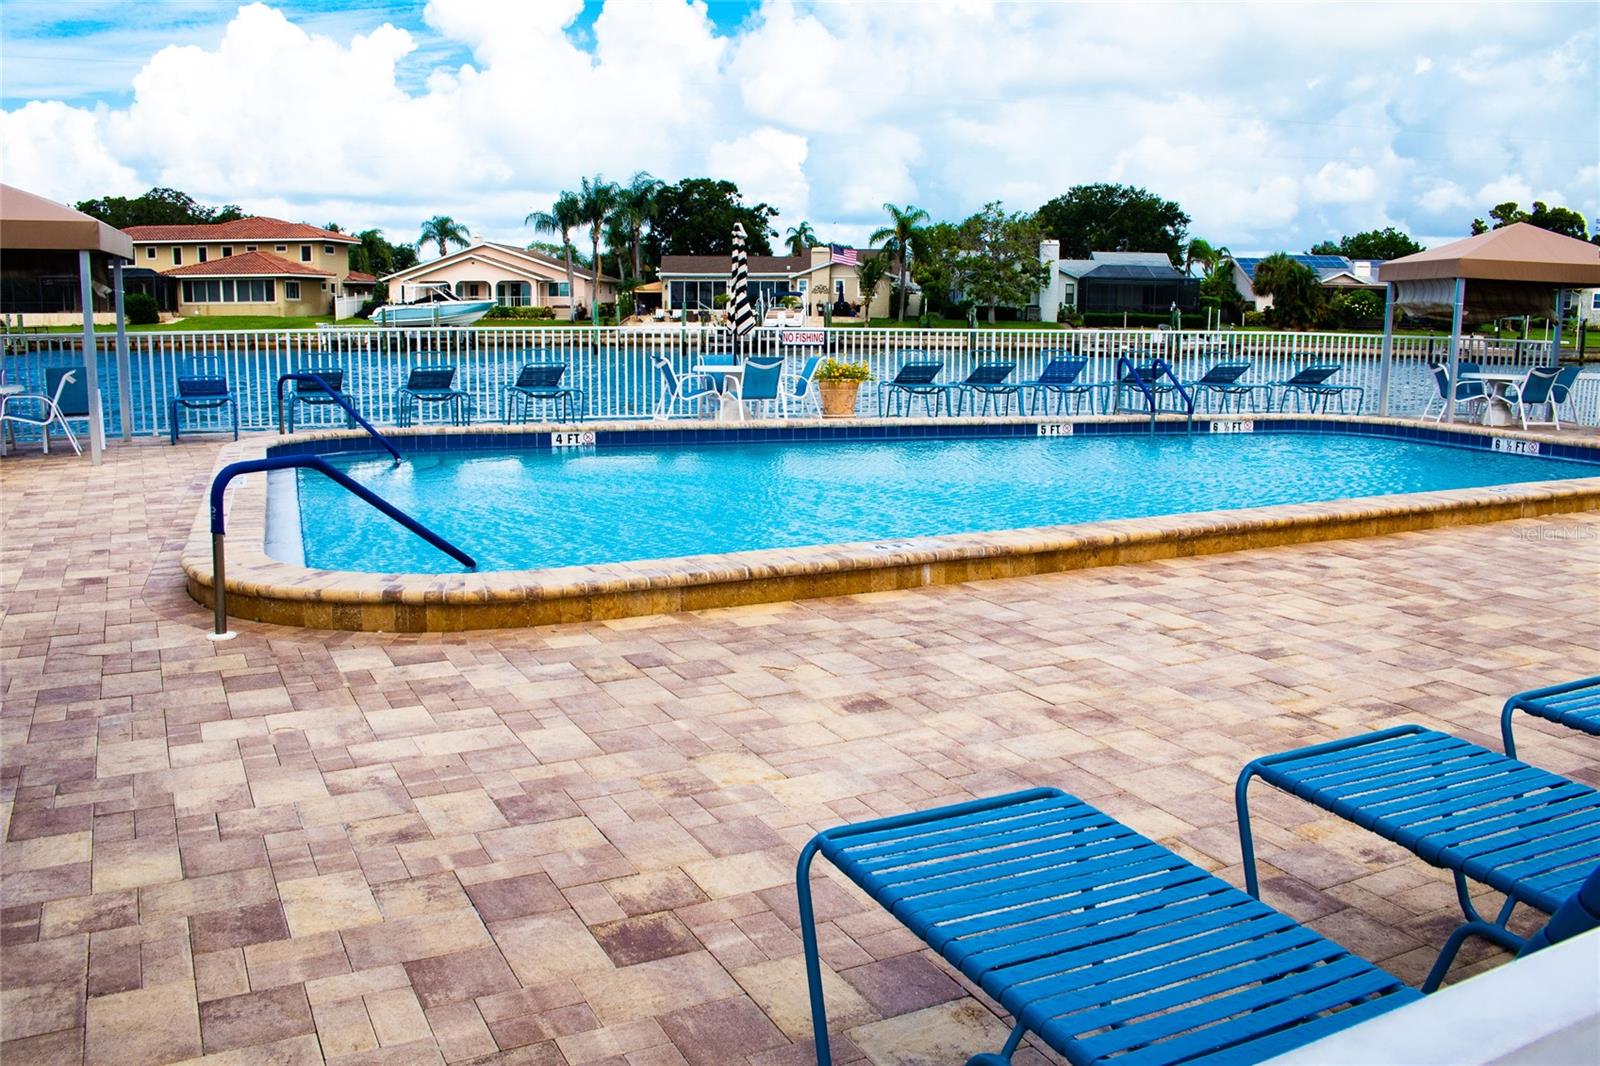 One Of the Community's Four Heated Pools, One Of Two That Are Located On The Waterfront!